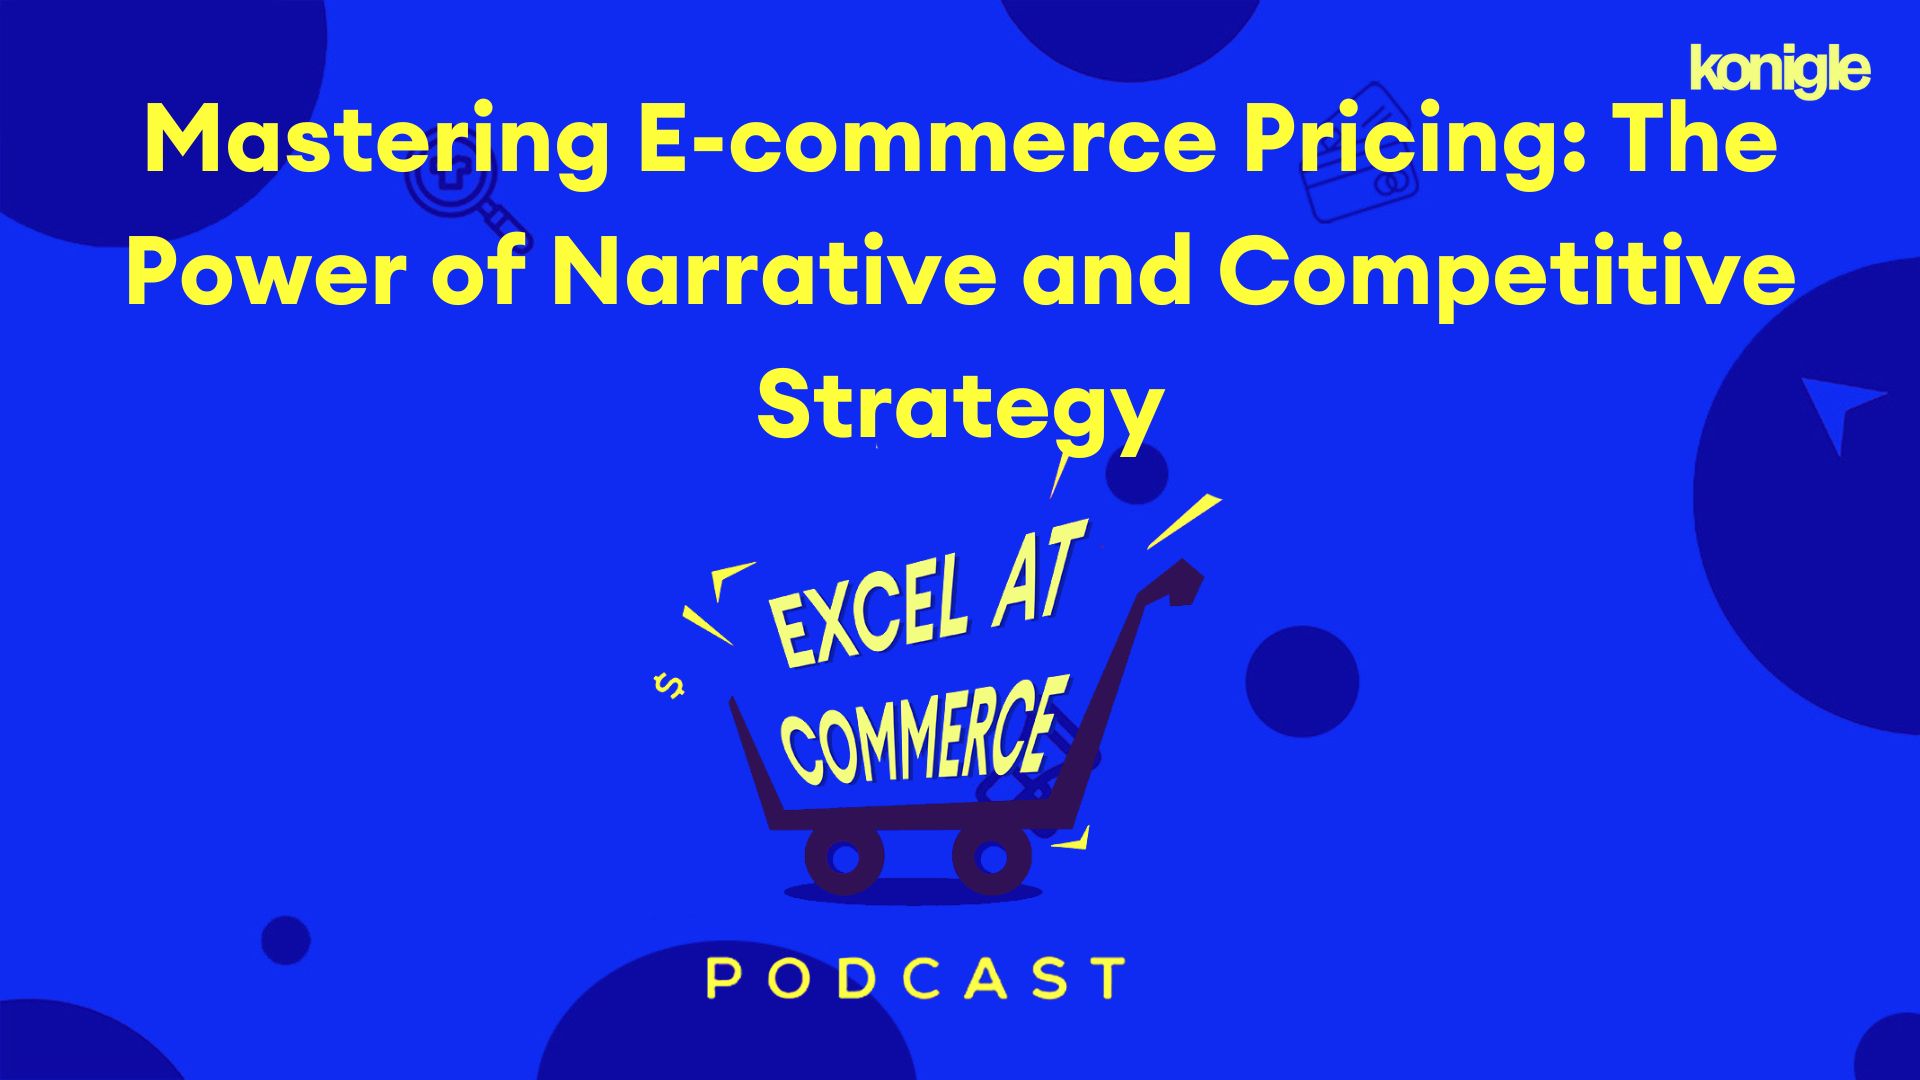 Mastering E-commerce Pricing: The Power of Narrative and Competitive Strategy